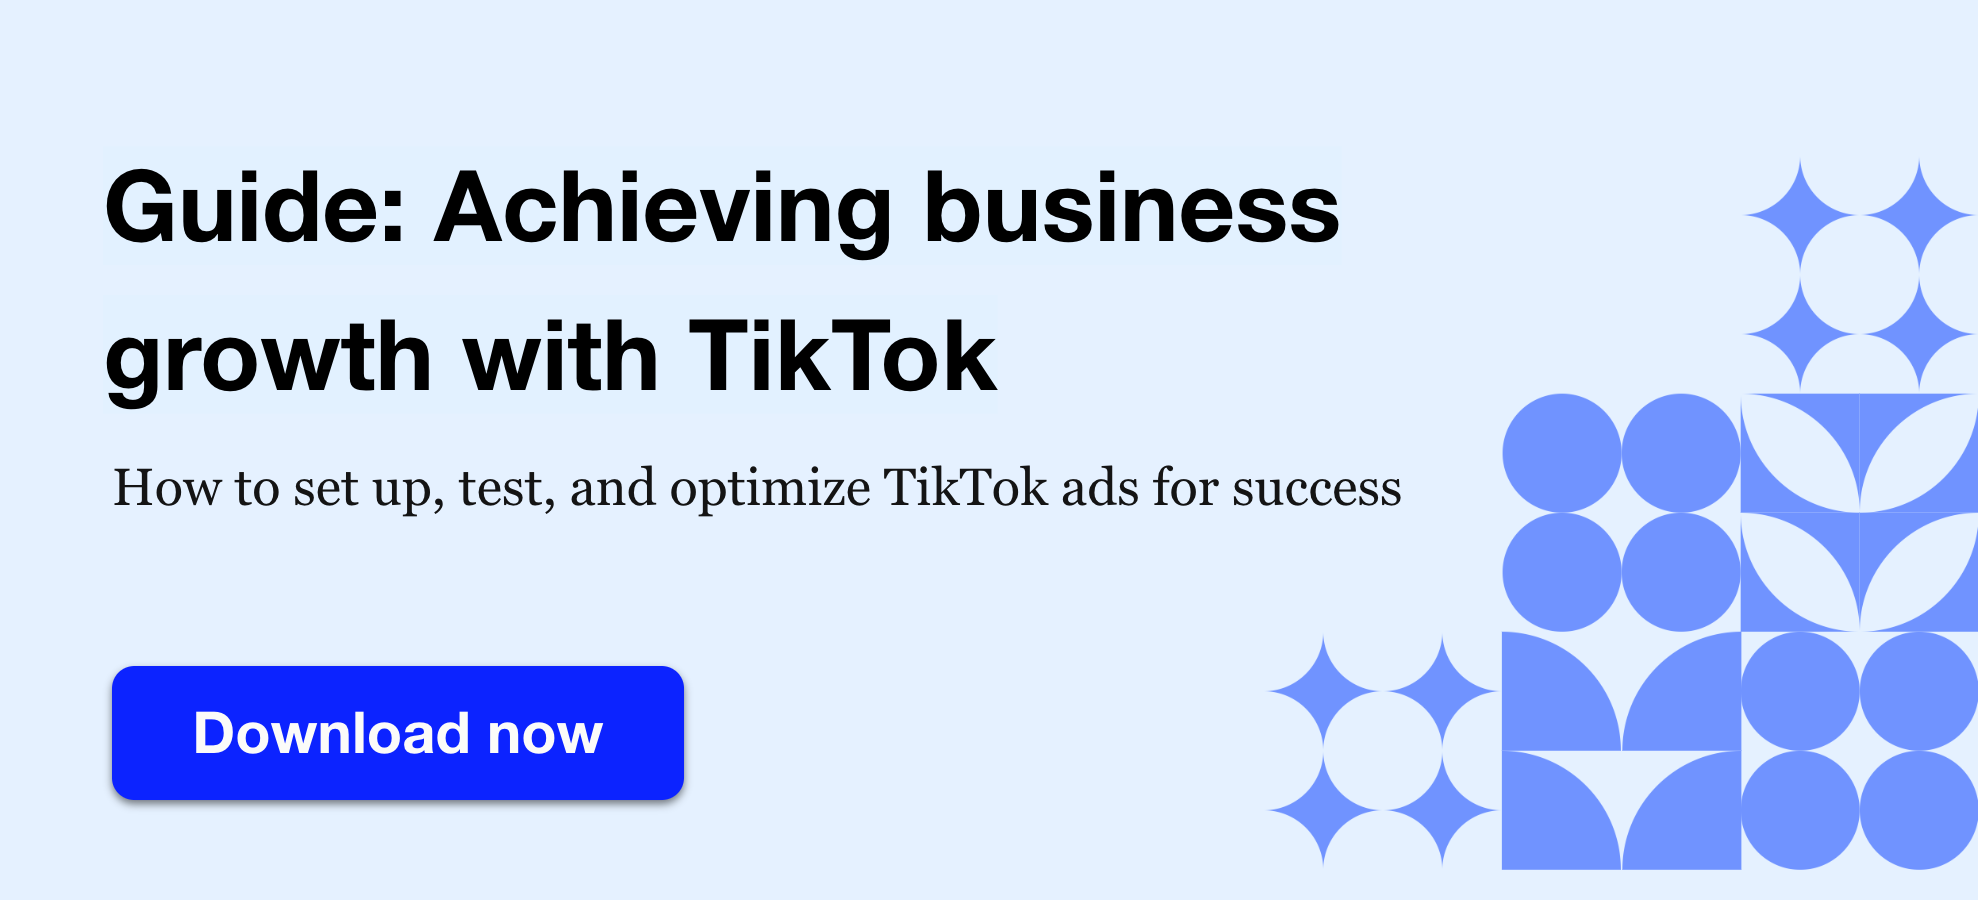 CTA for Guide to Achieving business growth with TikTok